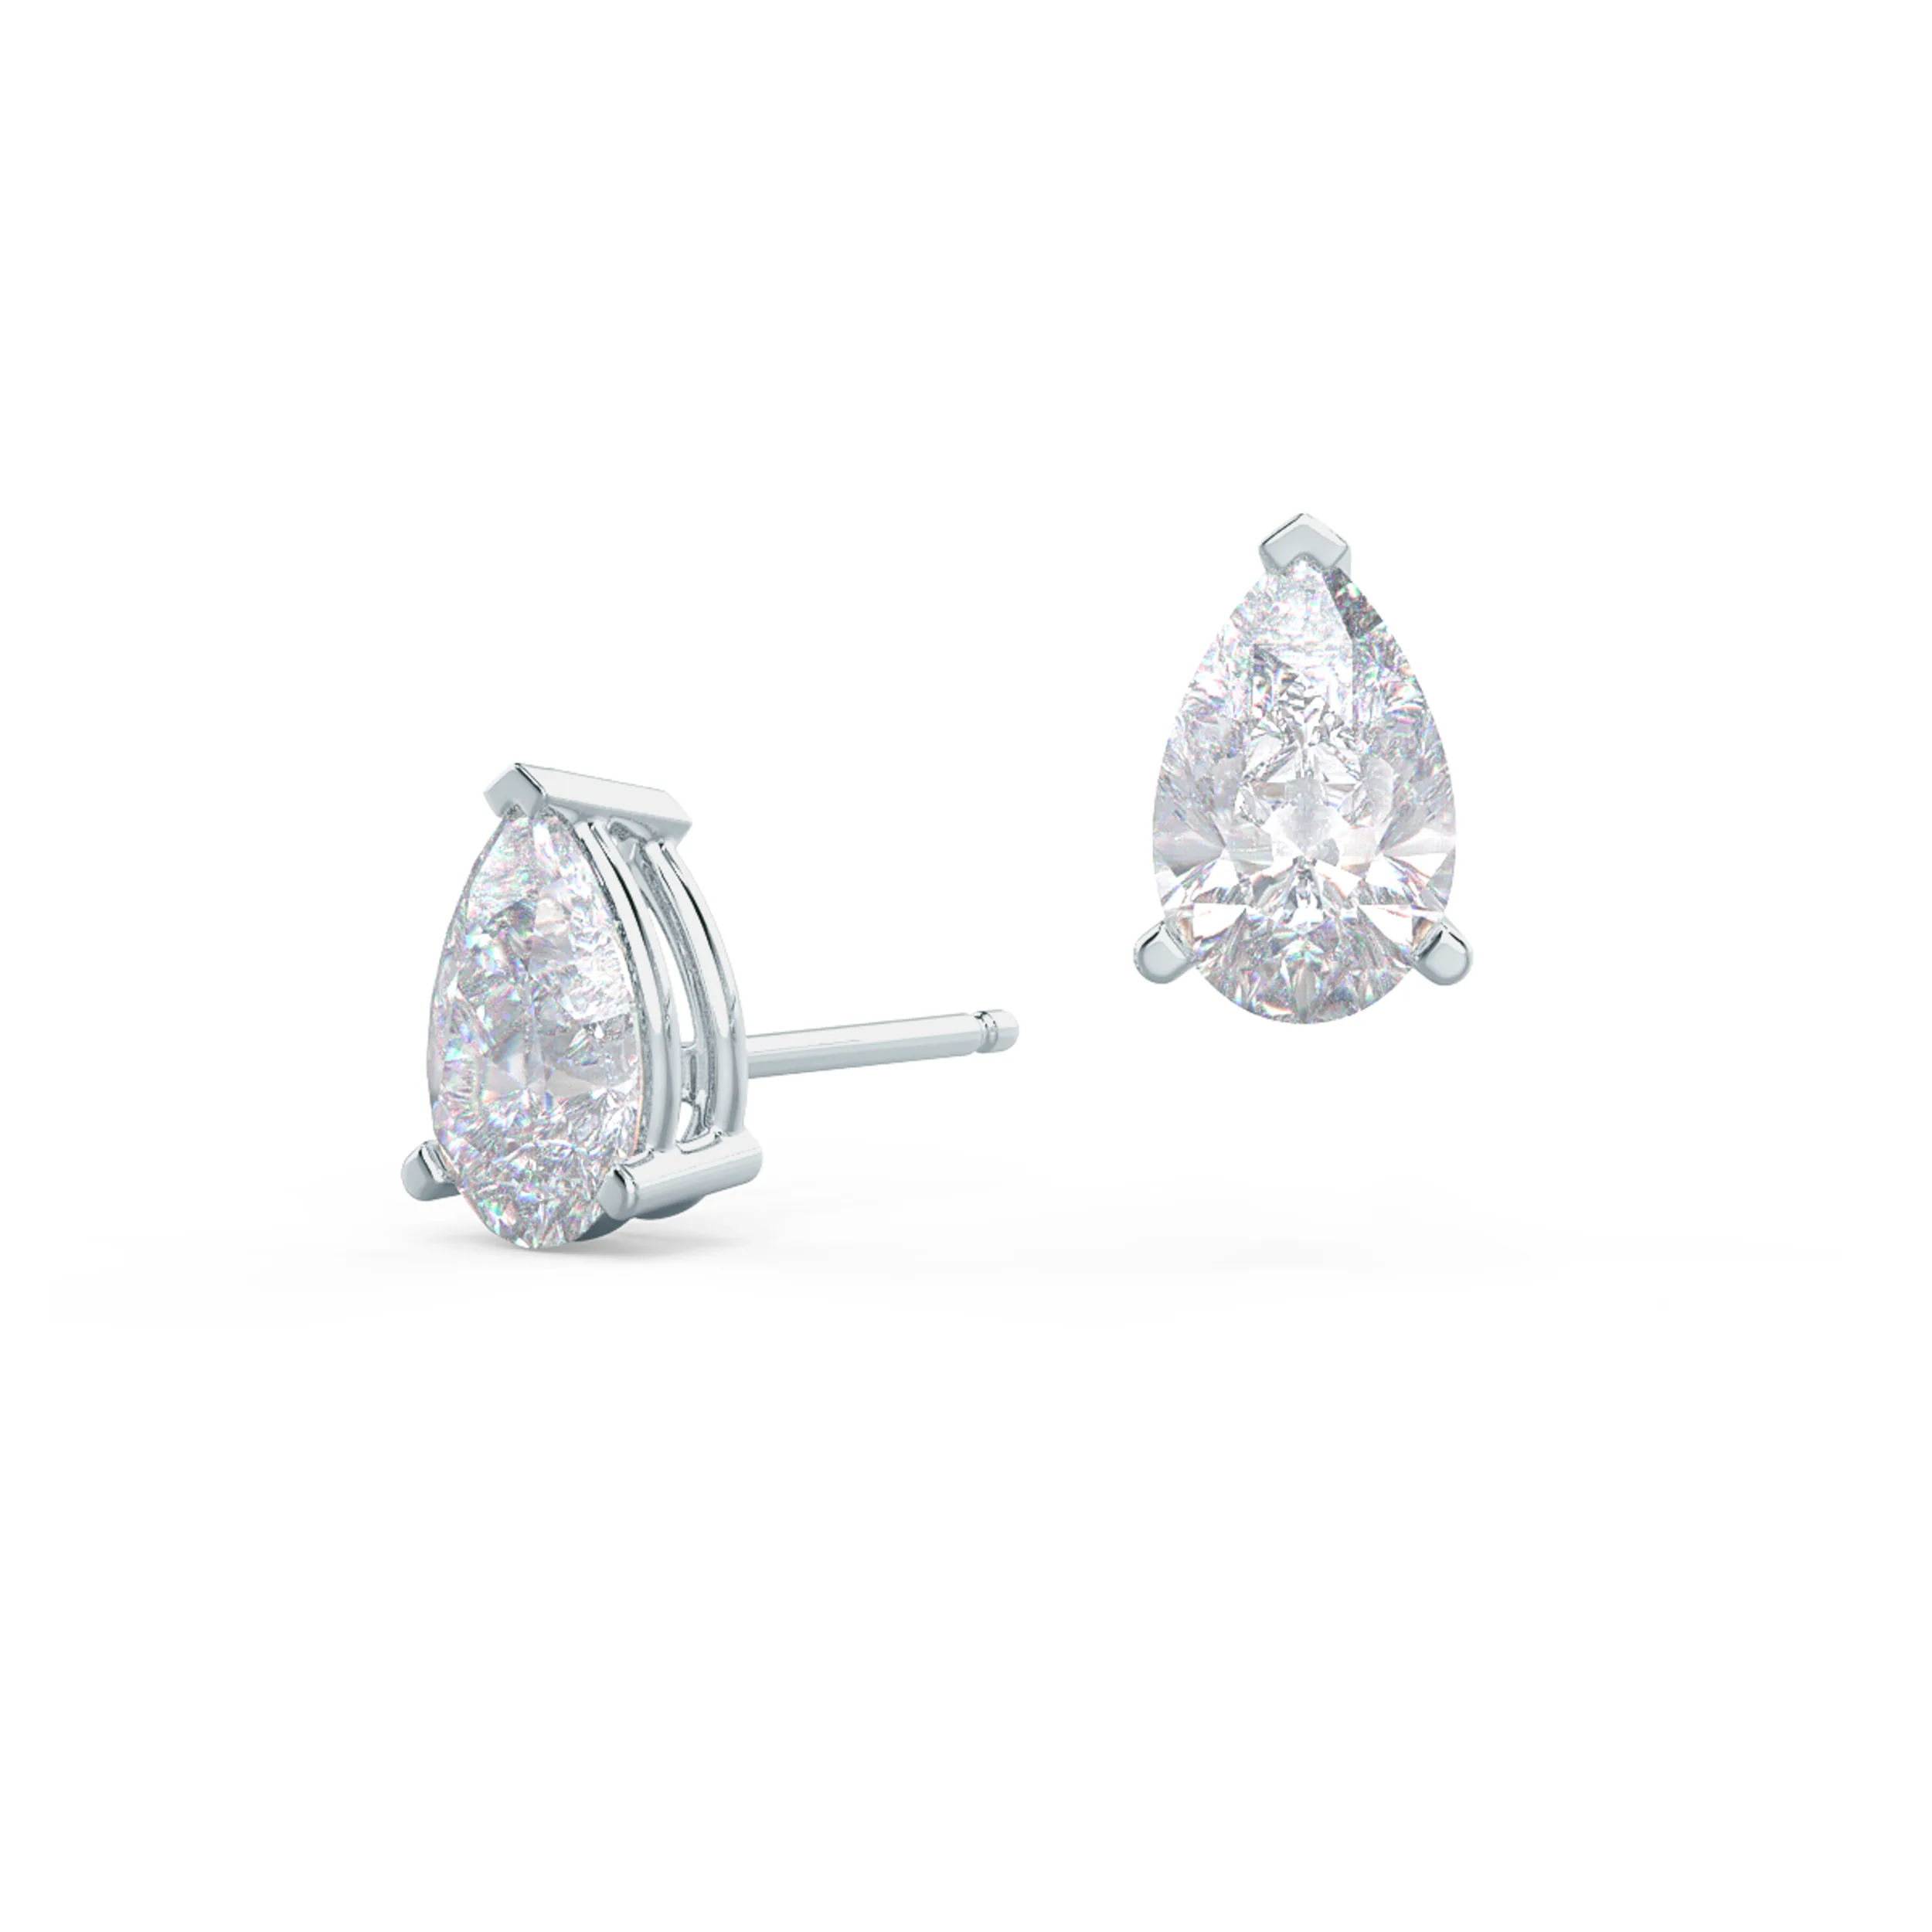 Exceptional Quality 1.4 ct Lab Diamonds set in 18k White Gold Pear Stud Earrings (Main View)